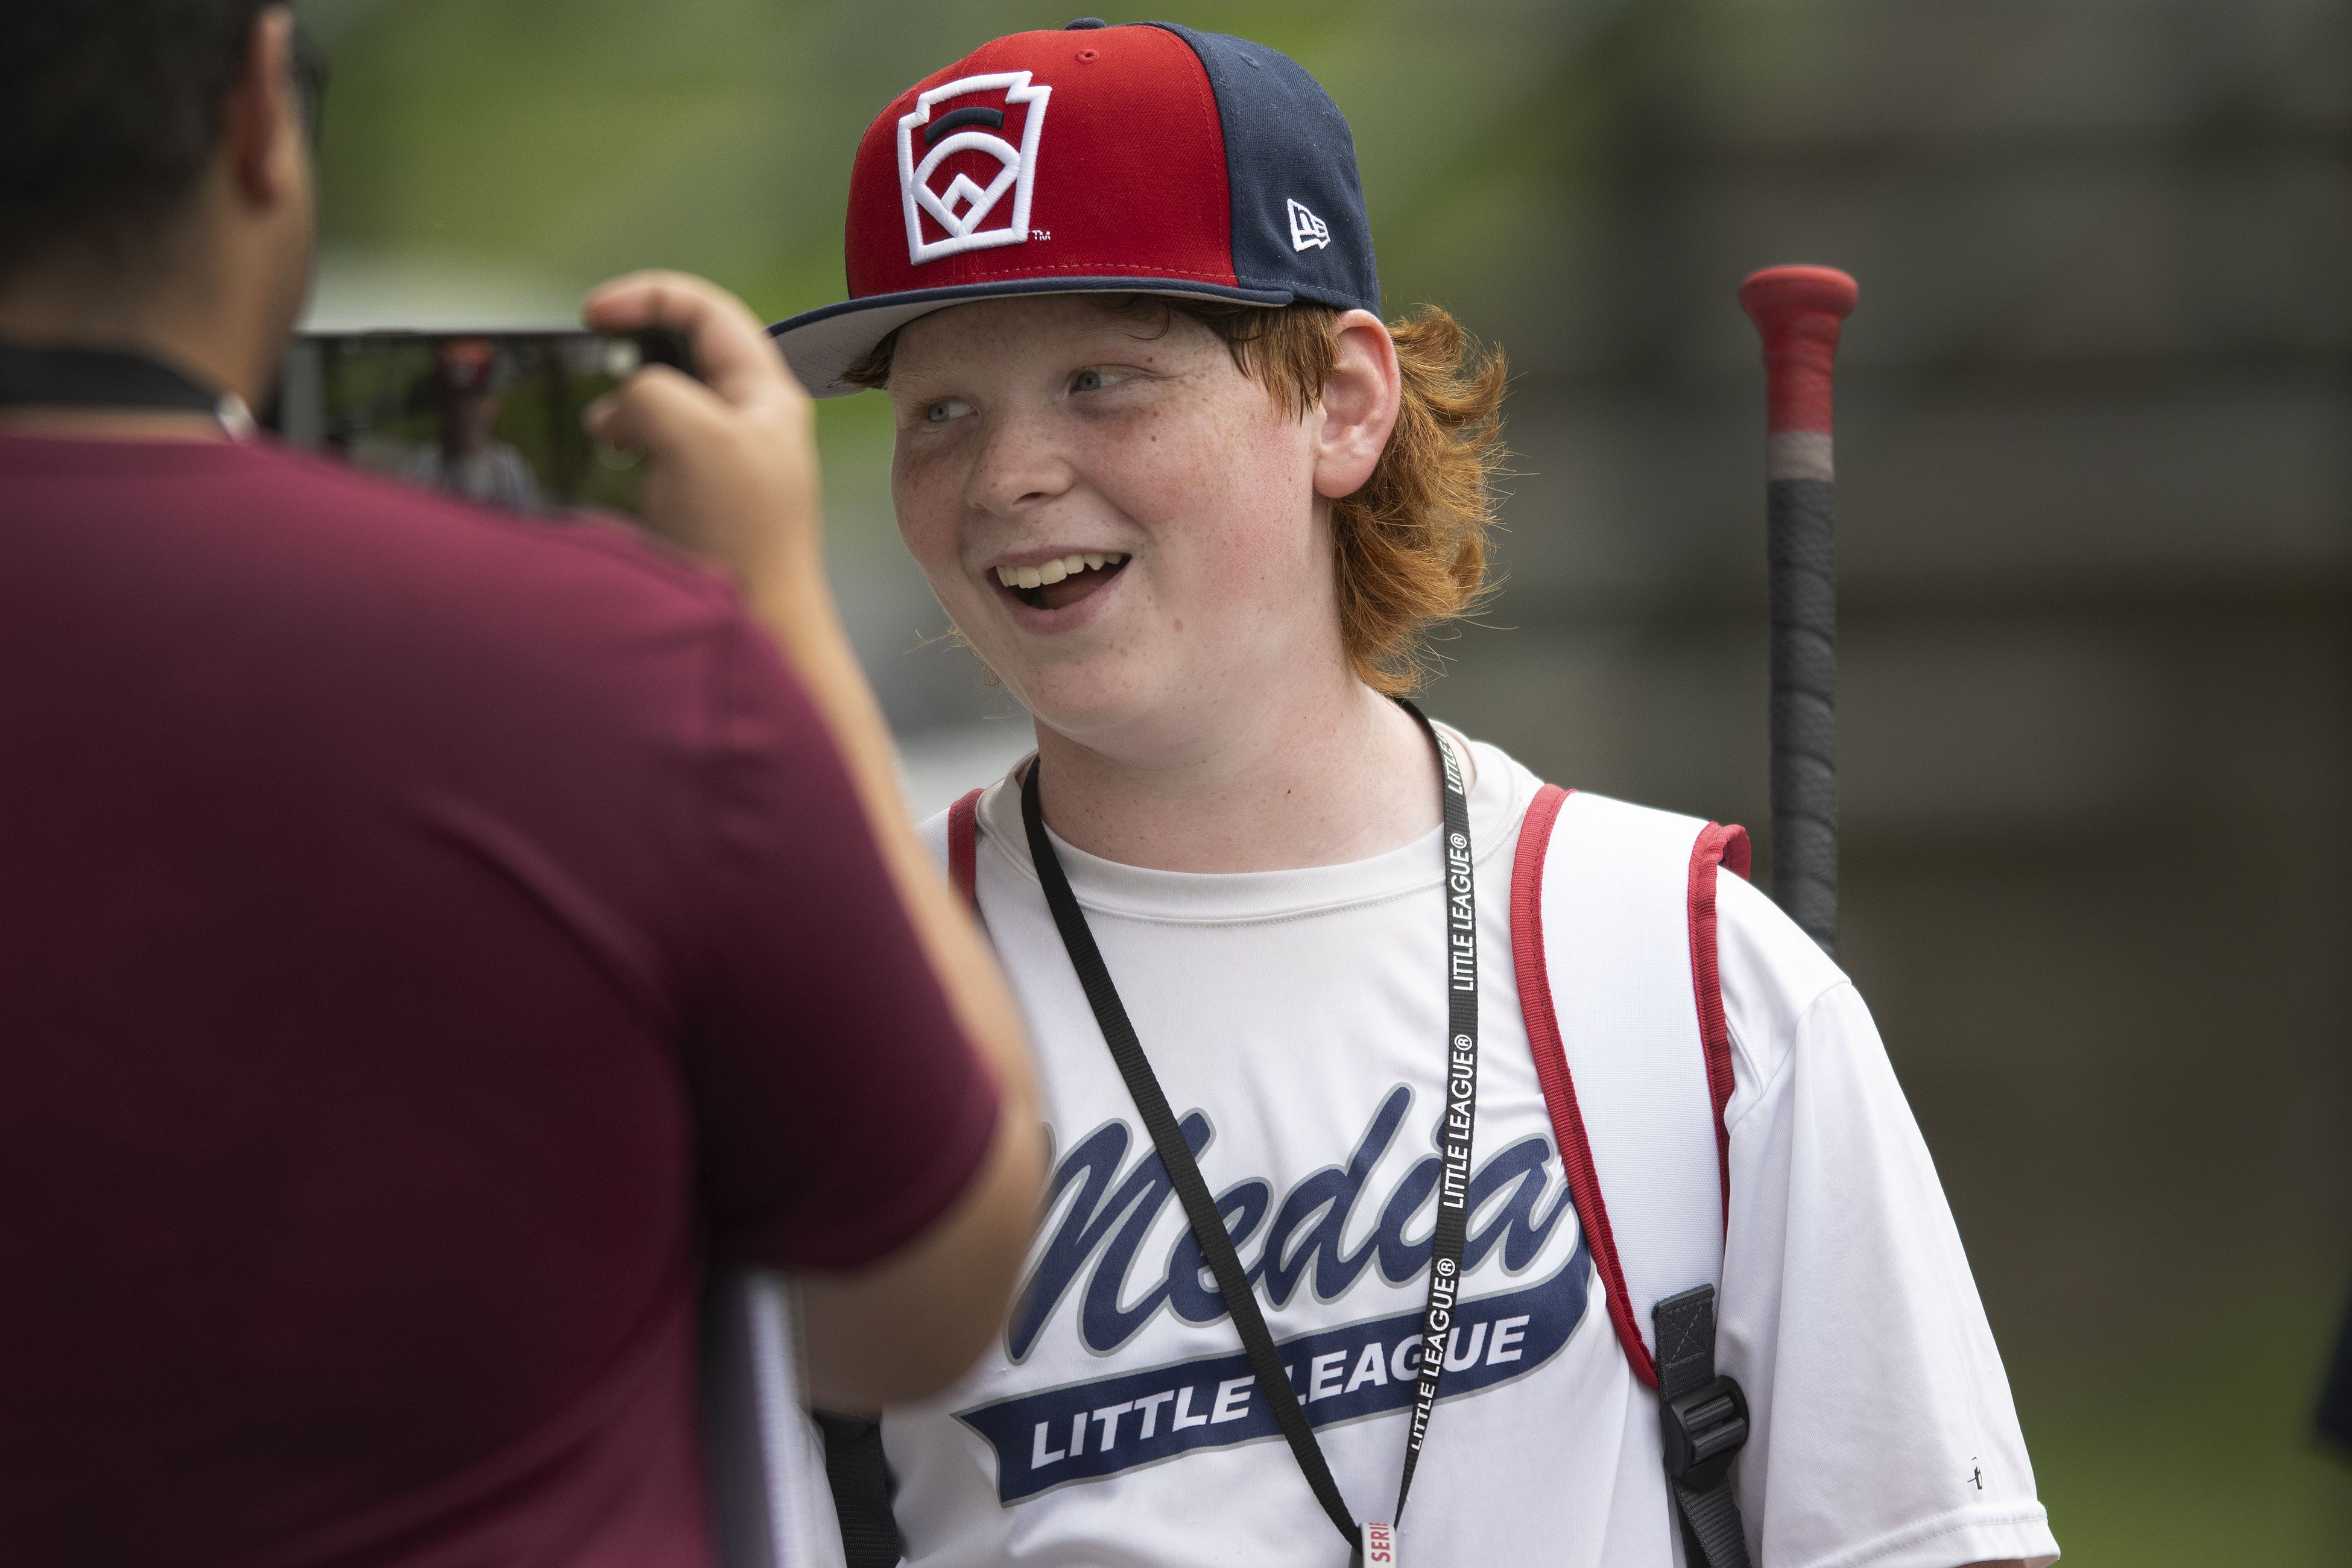 Needville records rousing win in opening game at Little League World Series  – Houston Public Media